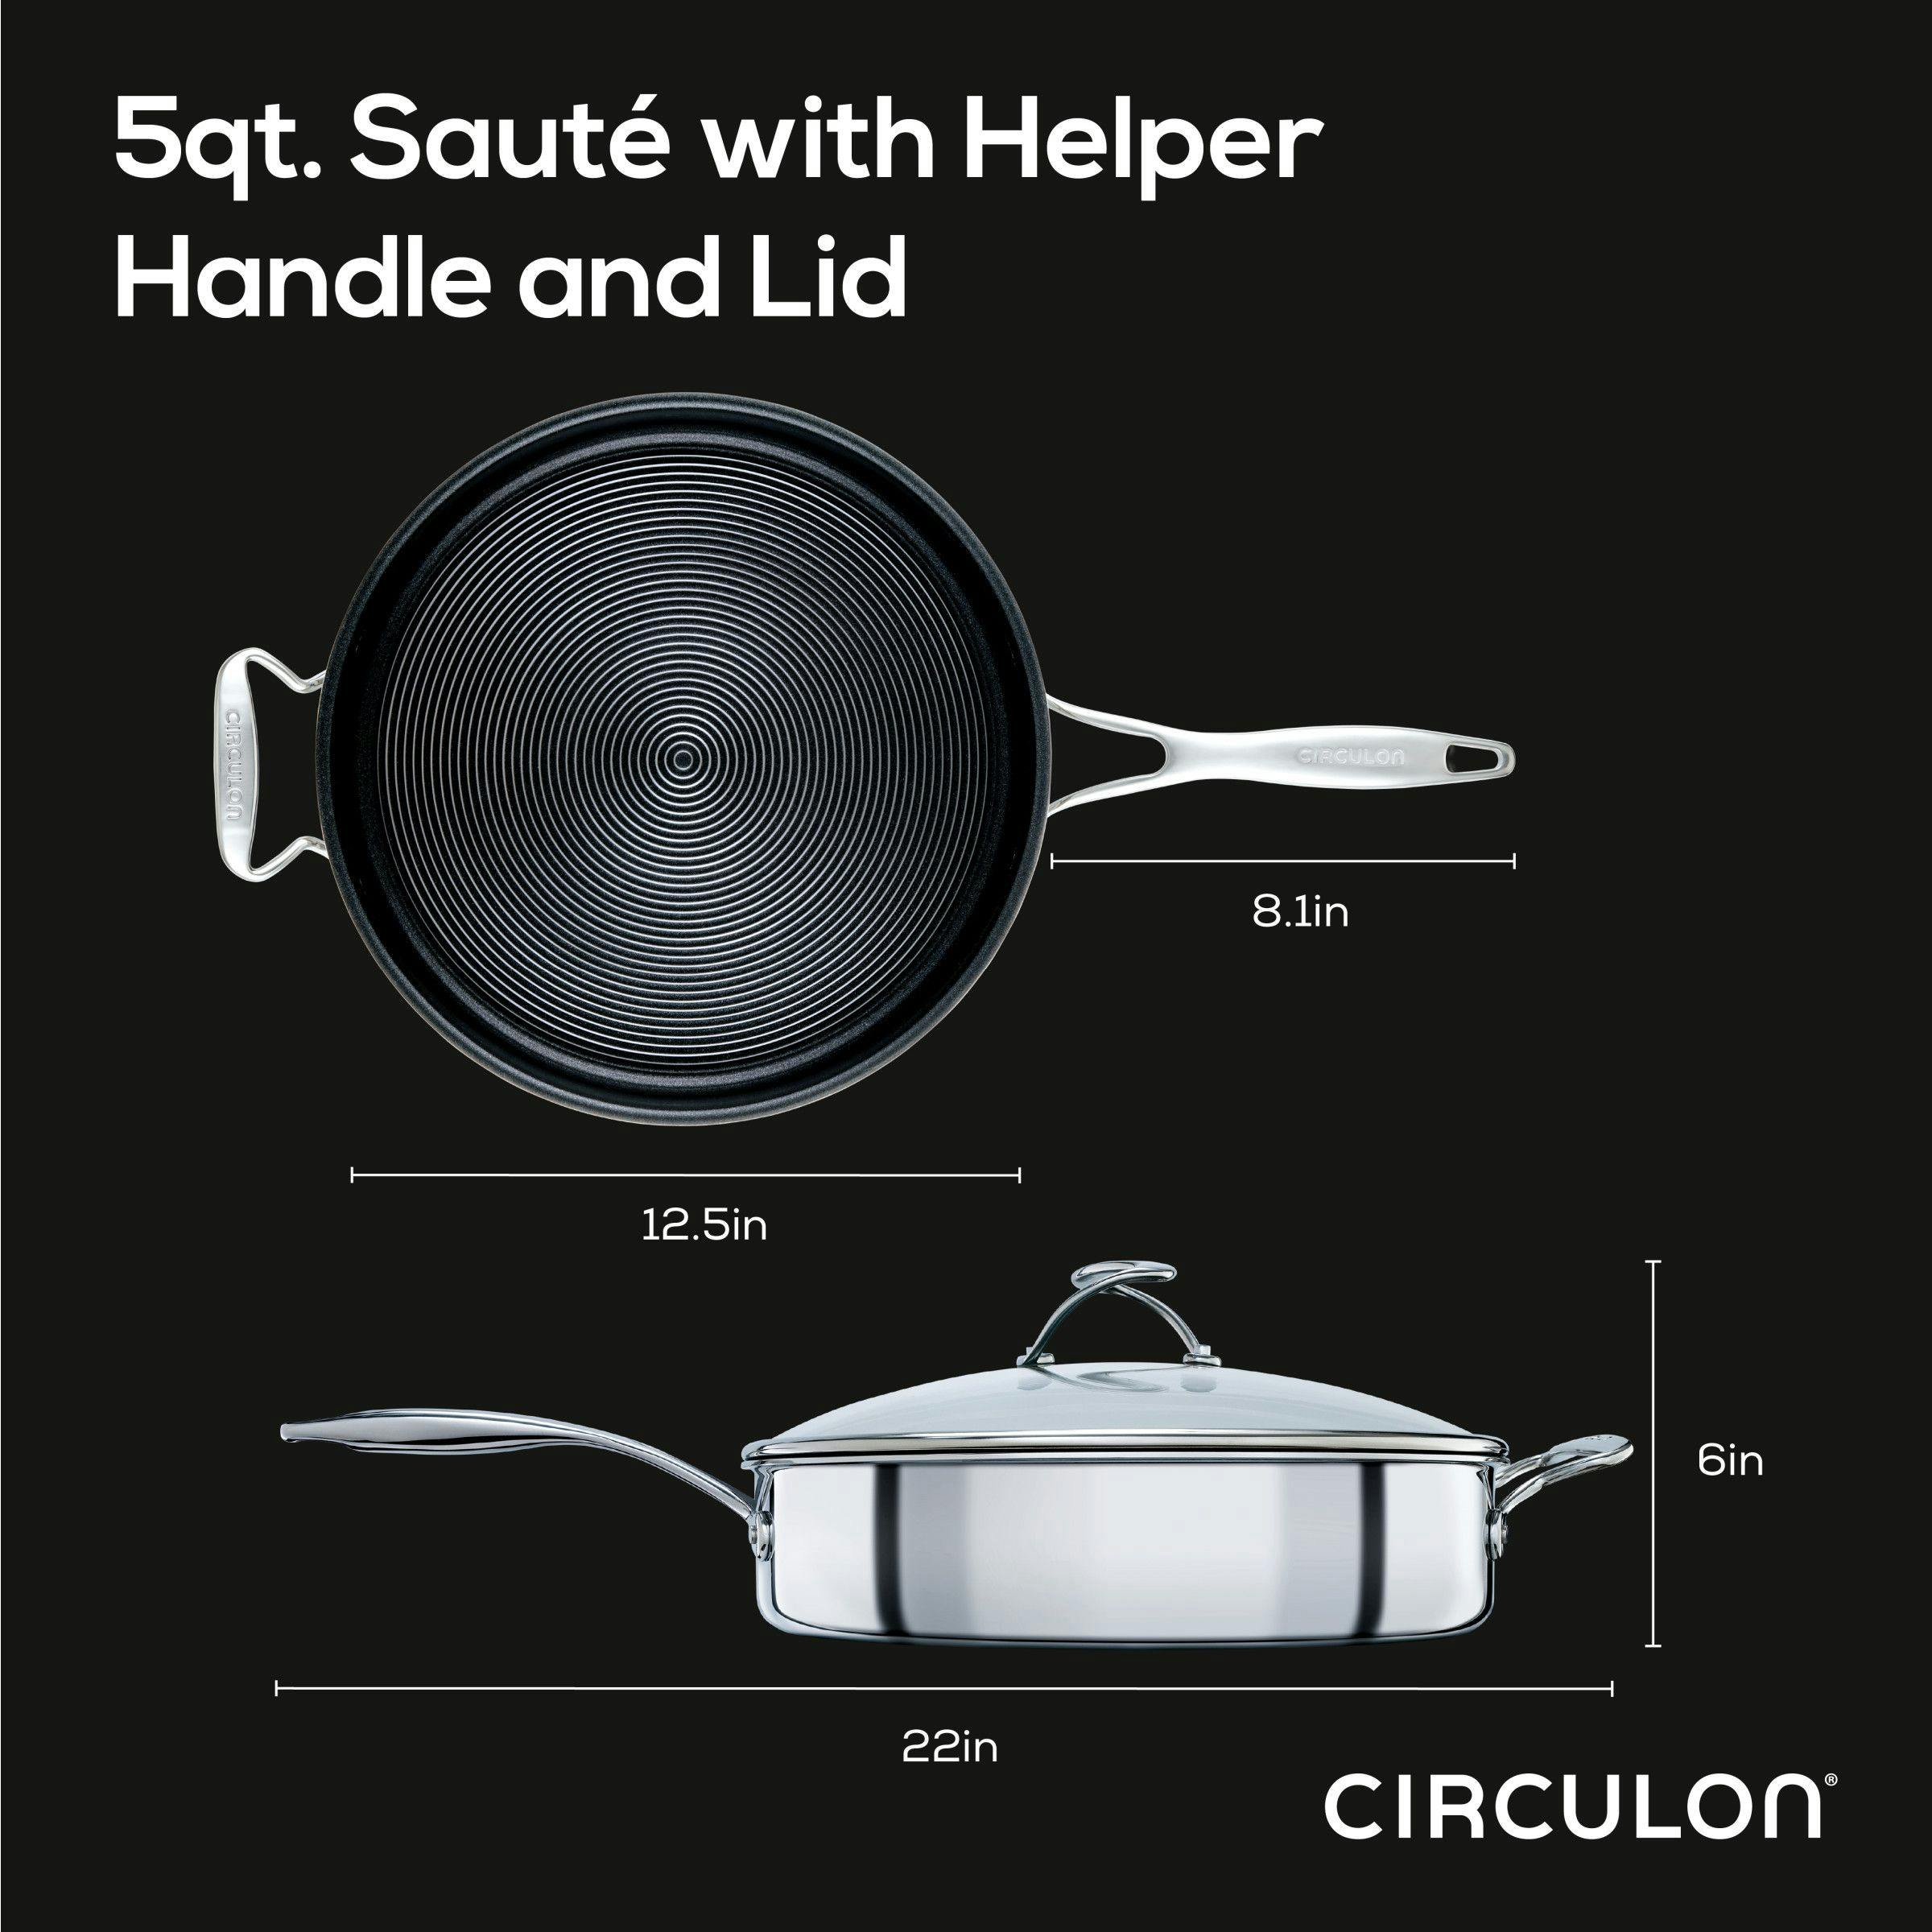 Circulon Clad Stainless Steel Saute Pan with Lid and Hybrid SteelShield and Nonstick Technology, 5-Quart, Silver